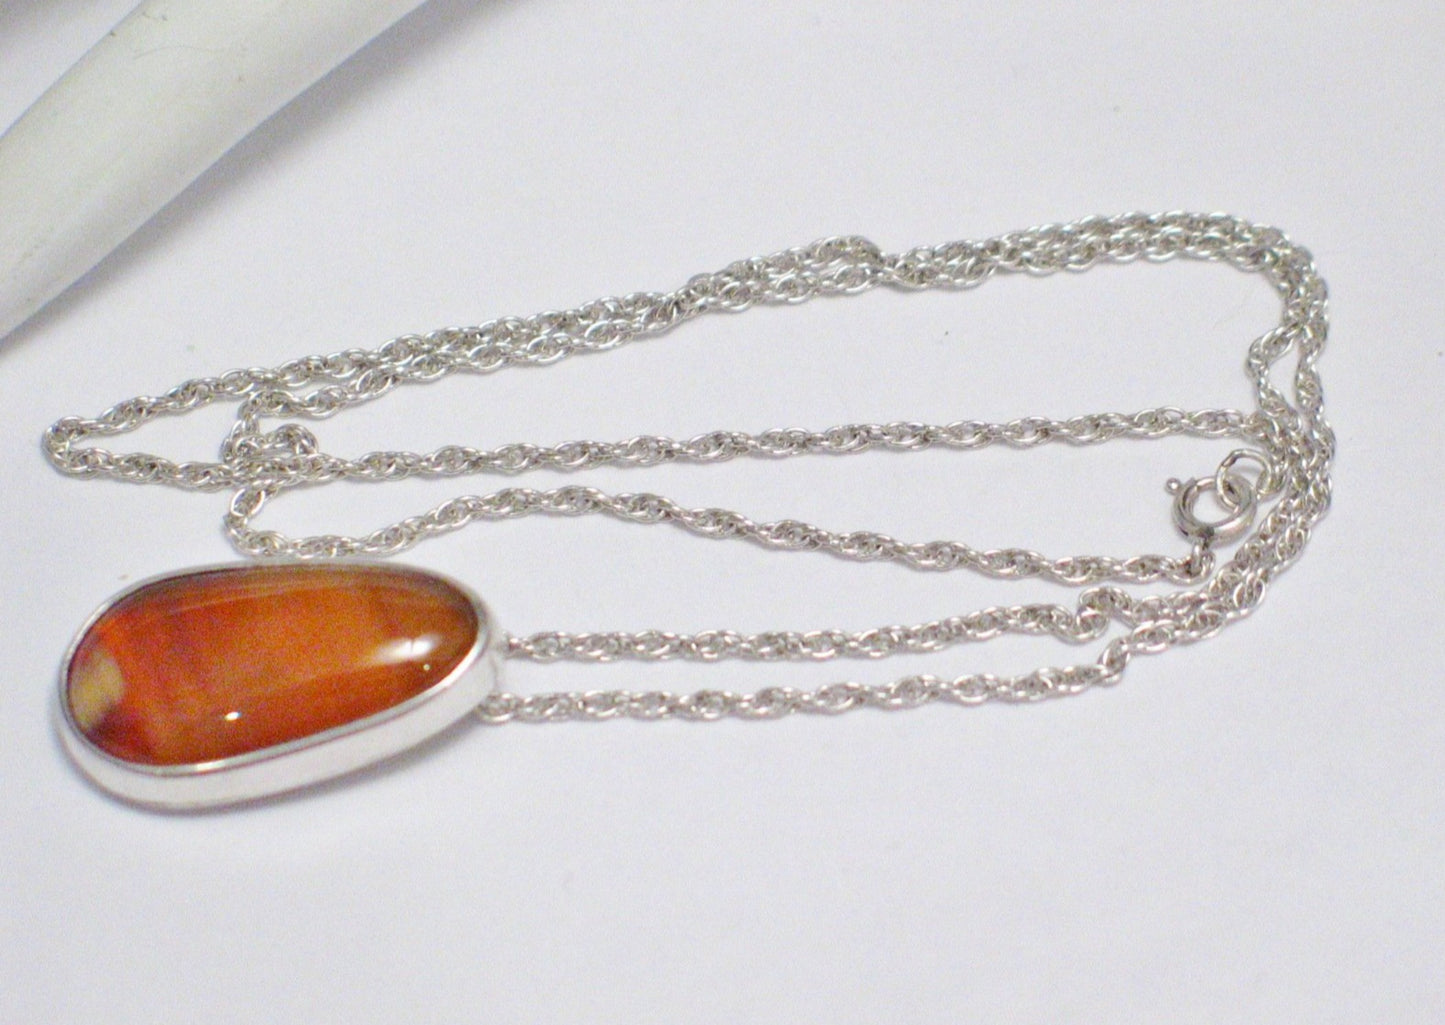 Sterling Silver Necklace, 18" Designer JP Pre-owned Orange Agate Stone Pendant Necklace - Blingschlingers Jewelry